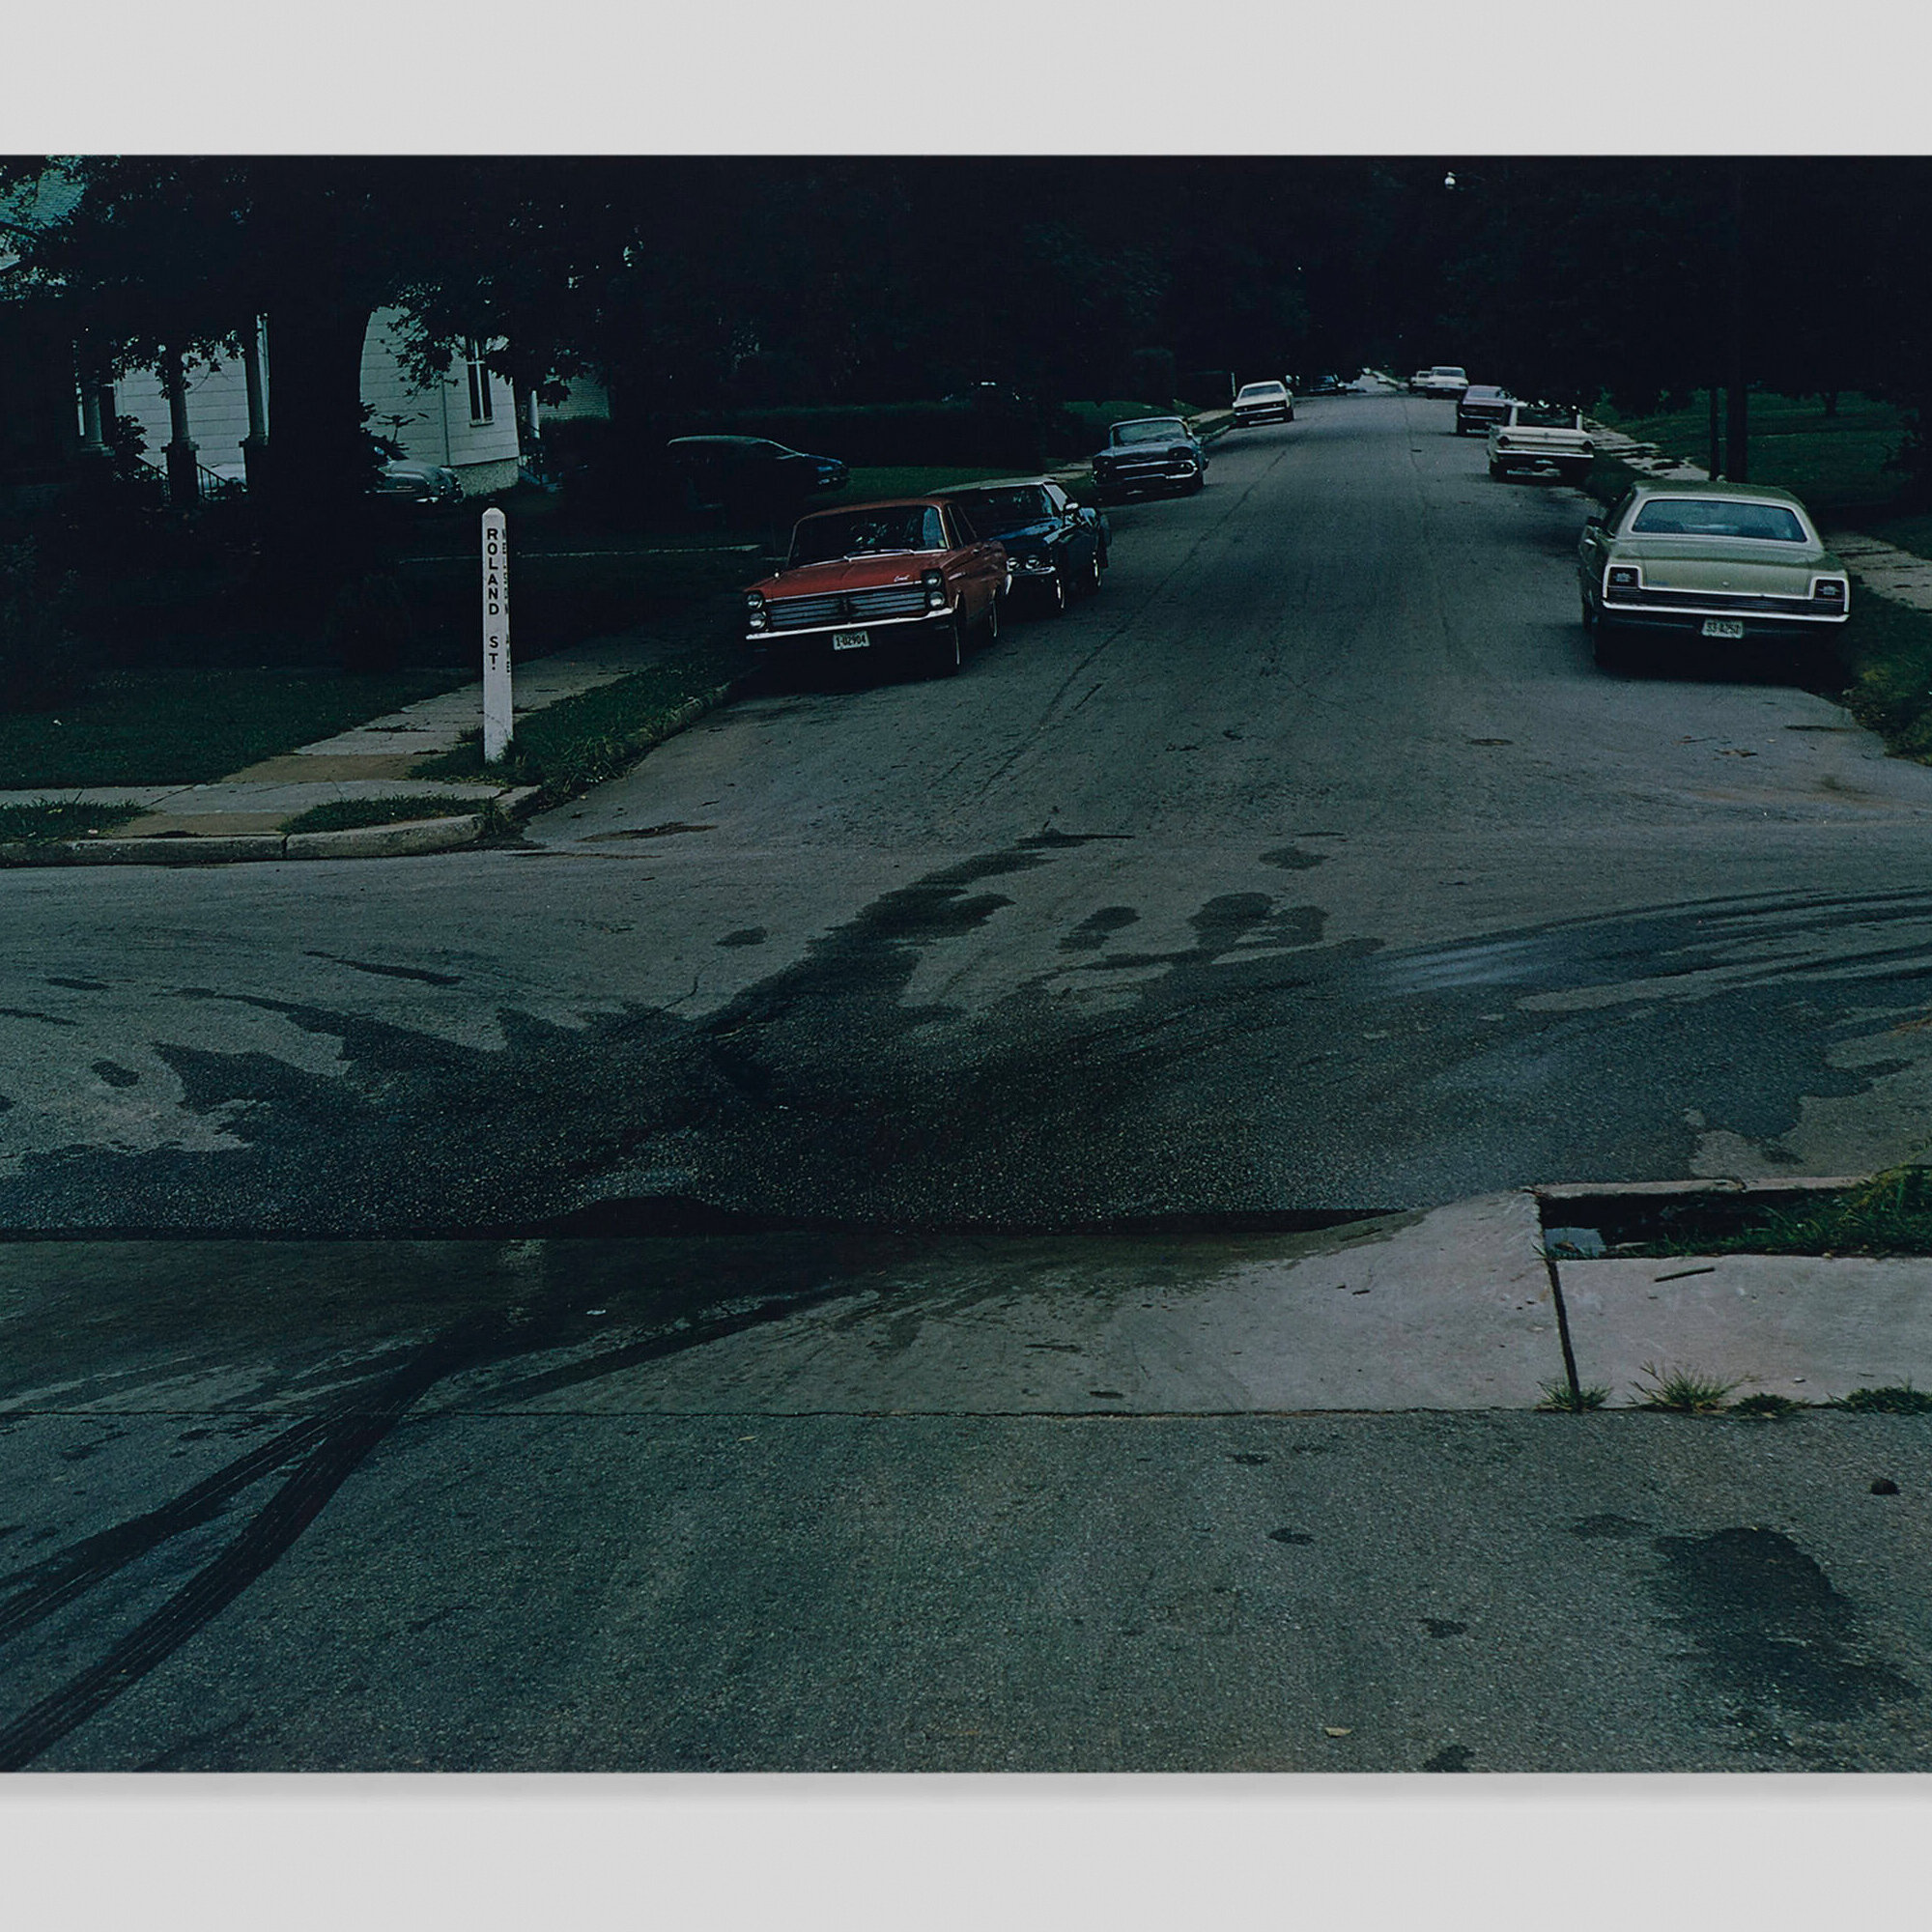 102: WILLIAM EGGLESTON, Untitled (Bottle on Cement Porch) (from 